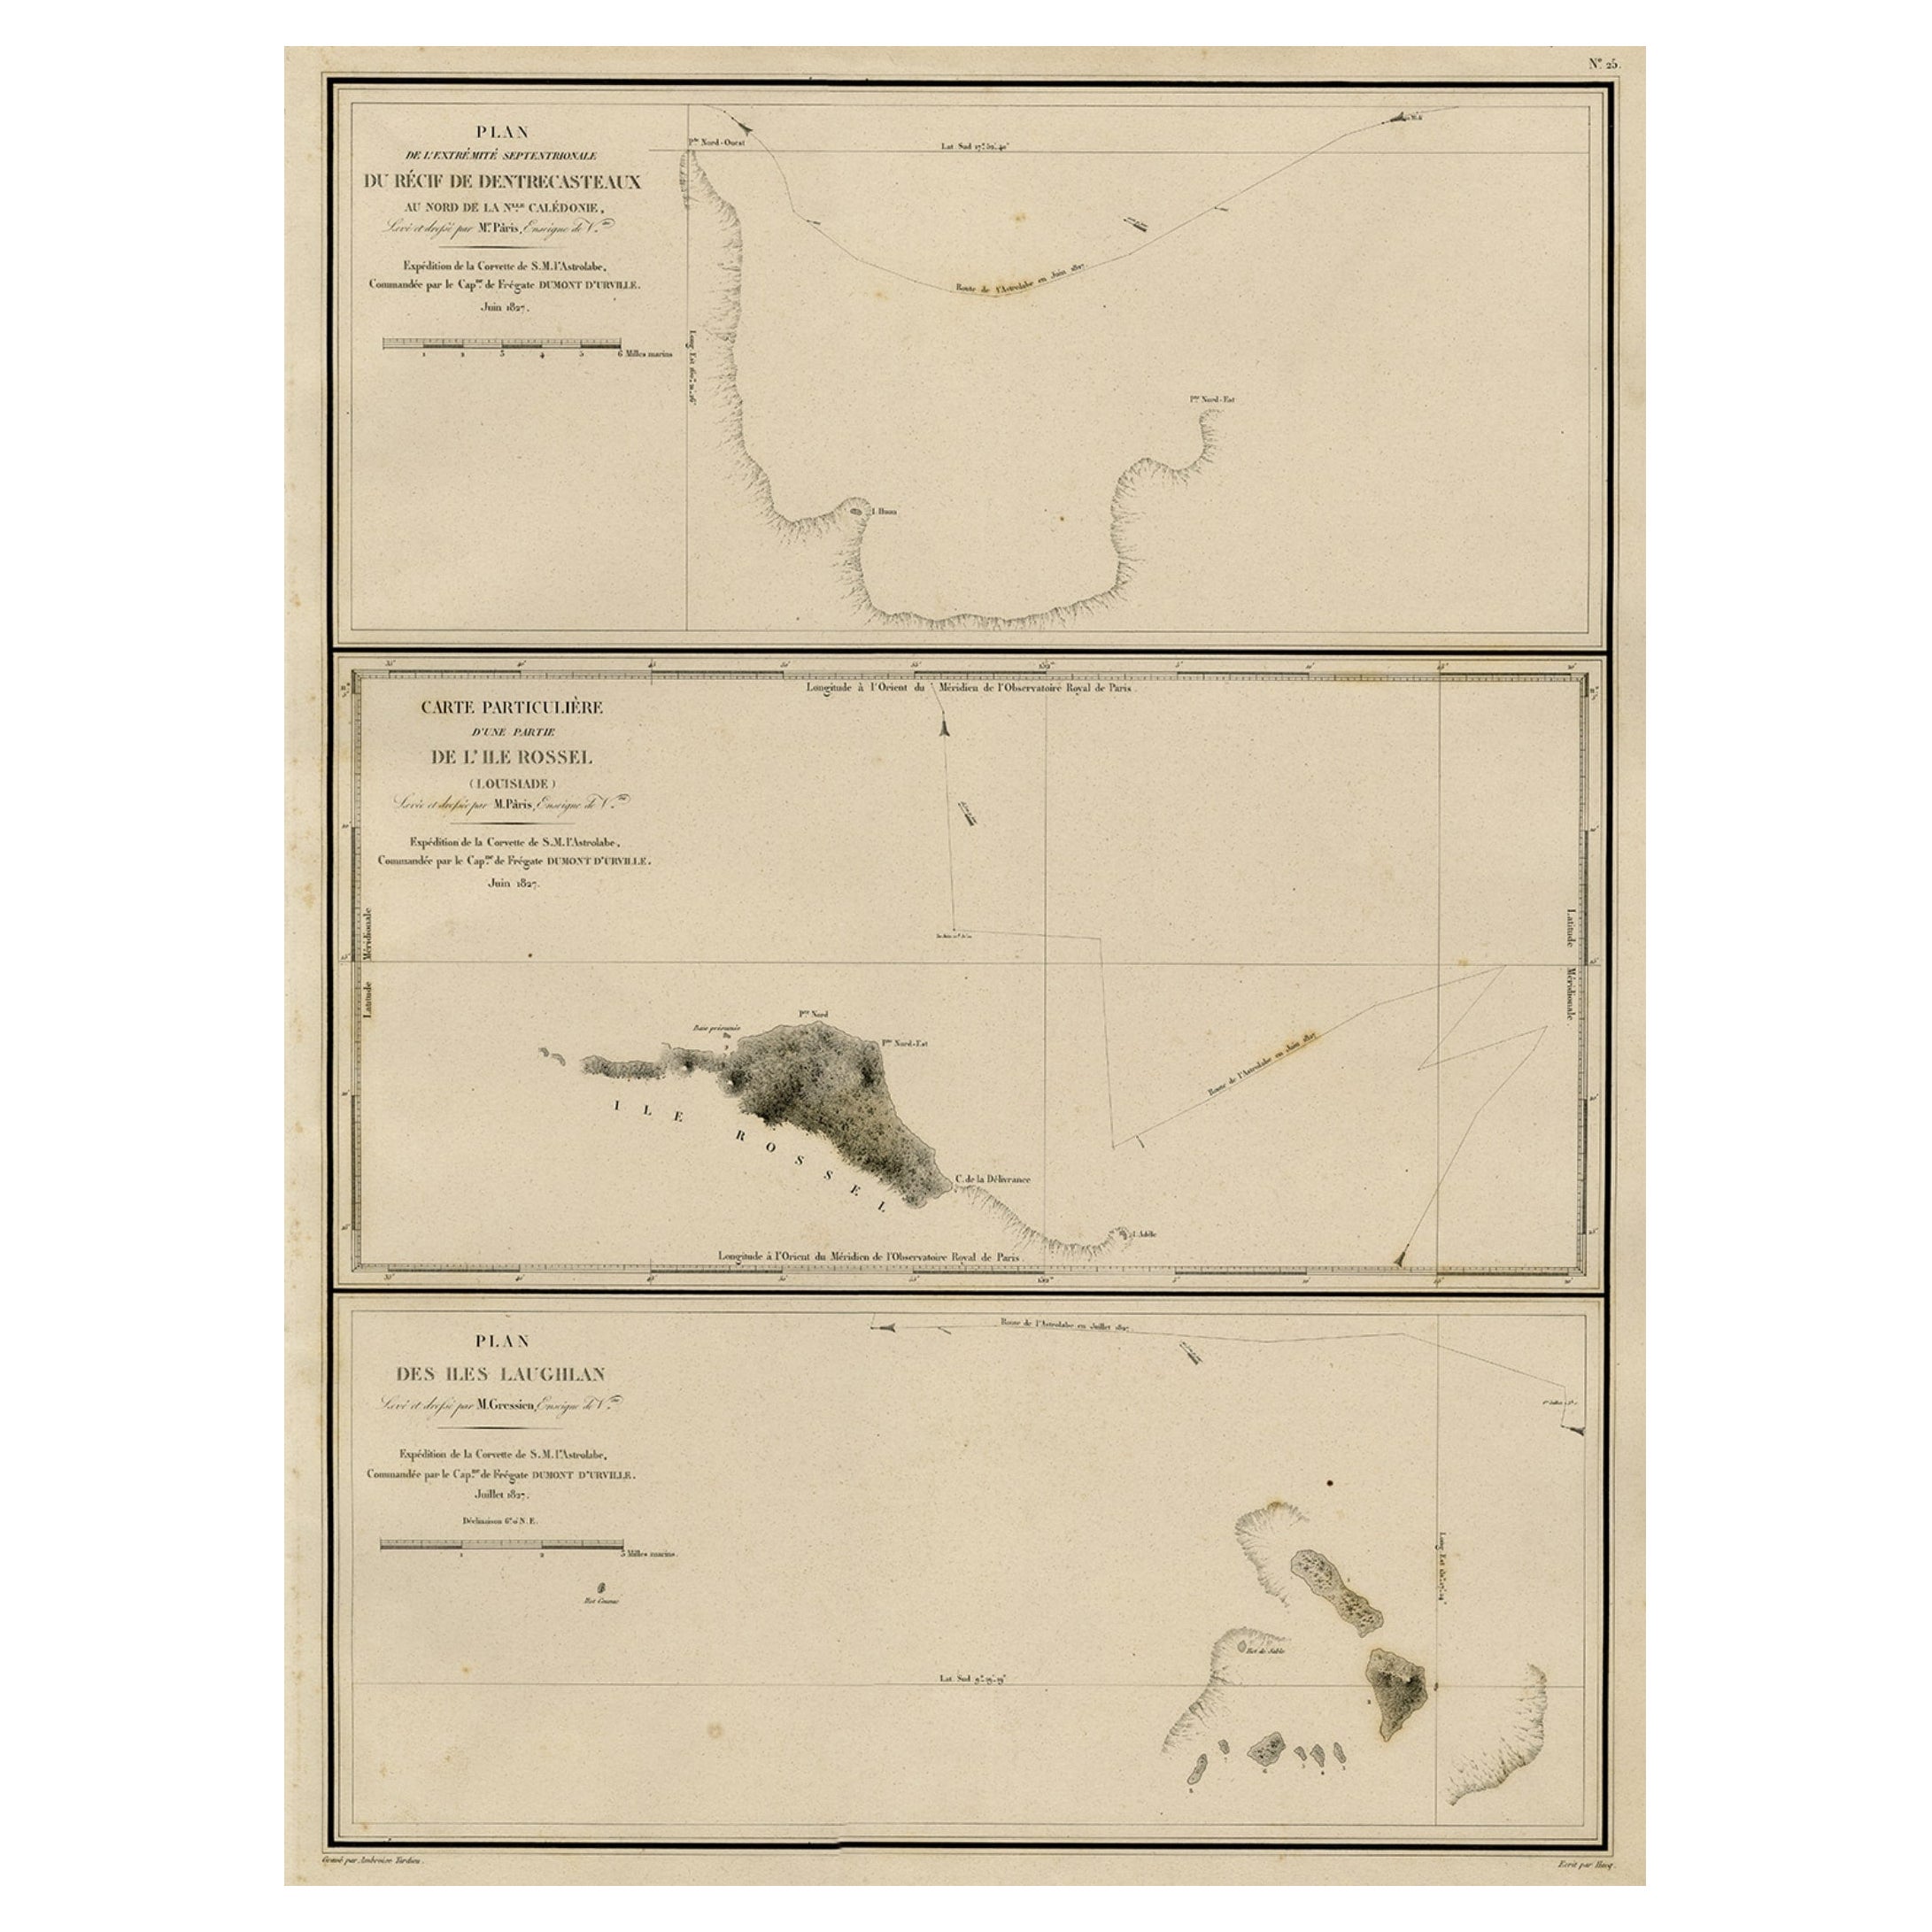 Map of the Laughlan Islands, Rossel Island & Reef North of New Caledonia, 1833